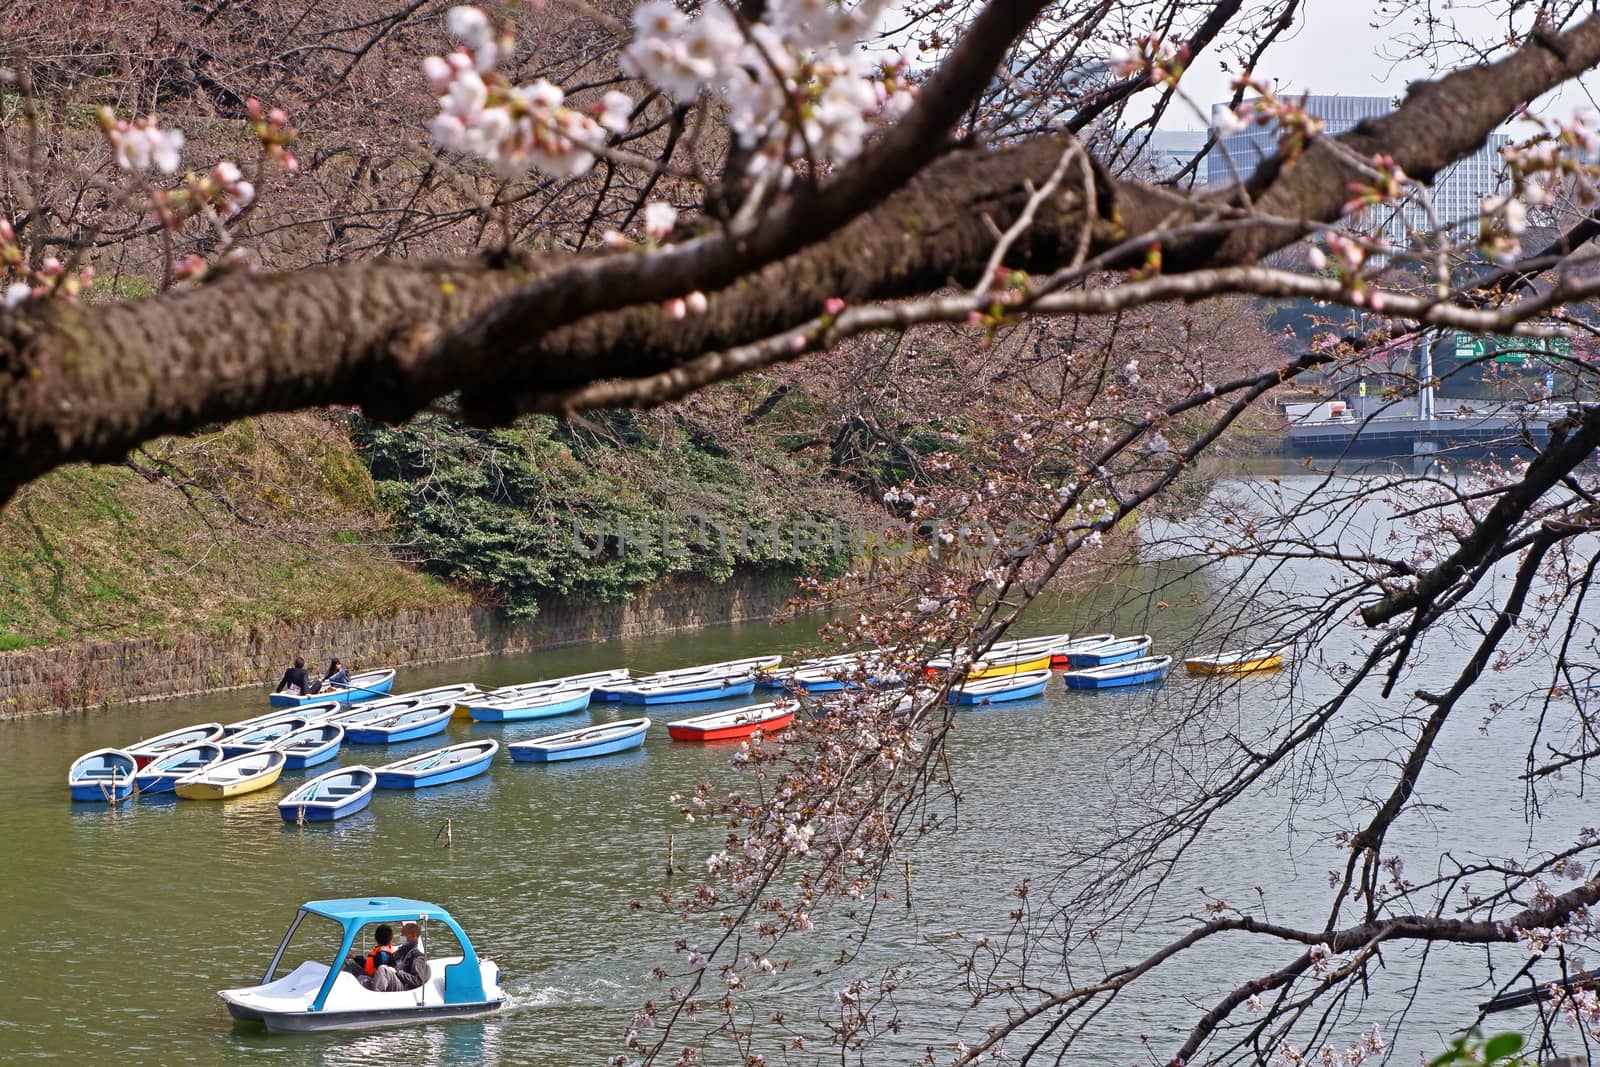 Japan outdoor park river with colorful sight seeing boat in sunn by cougarsan